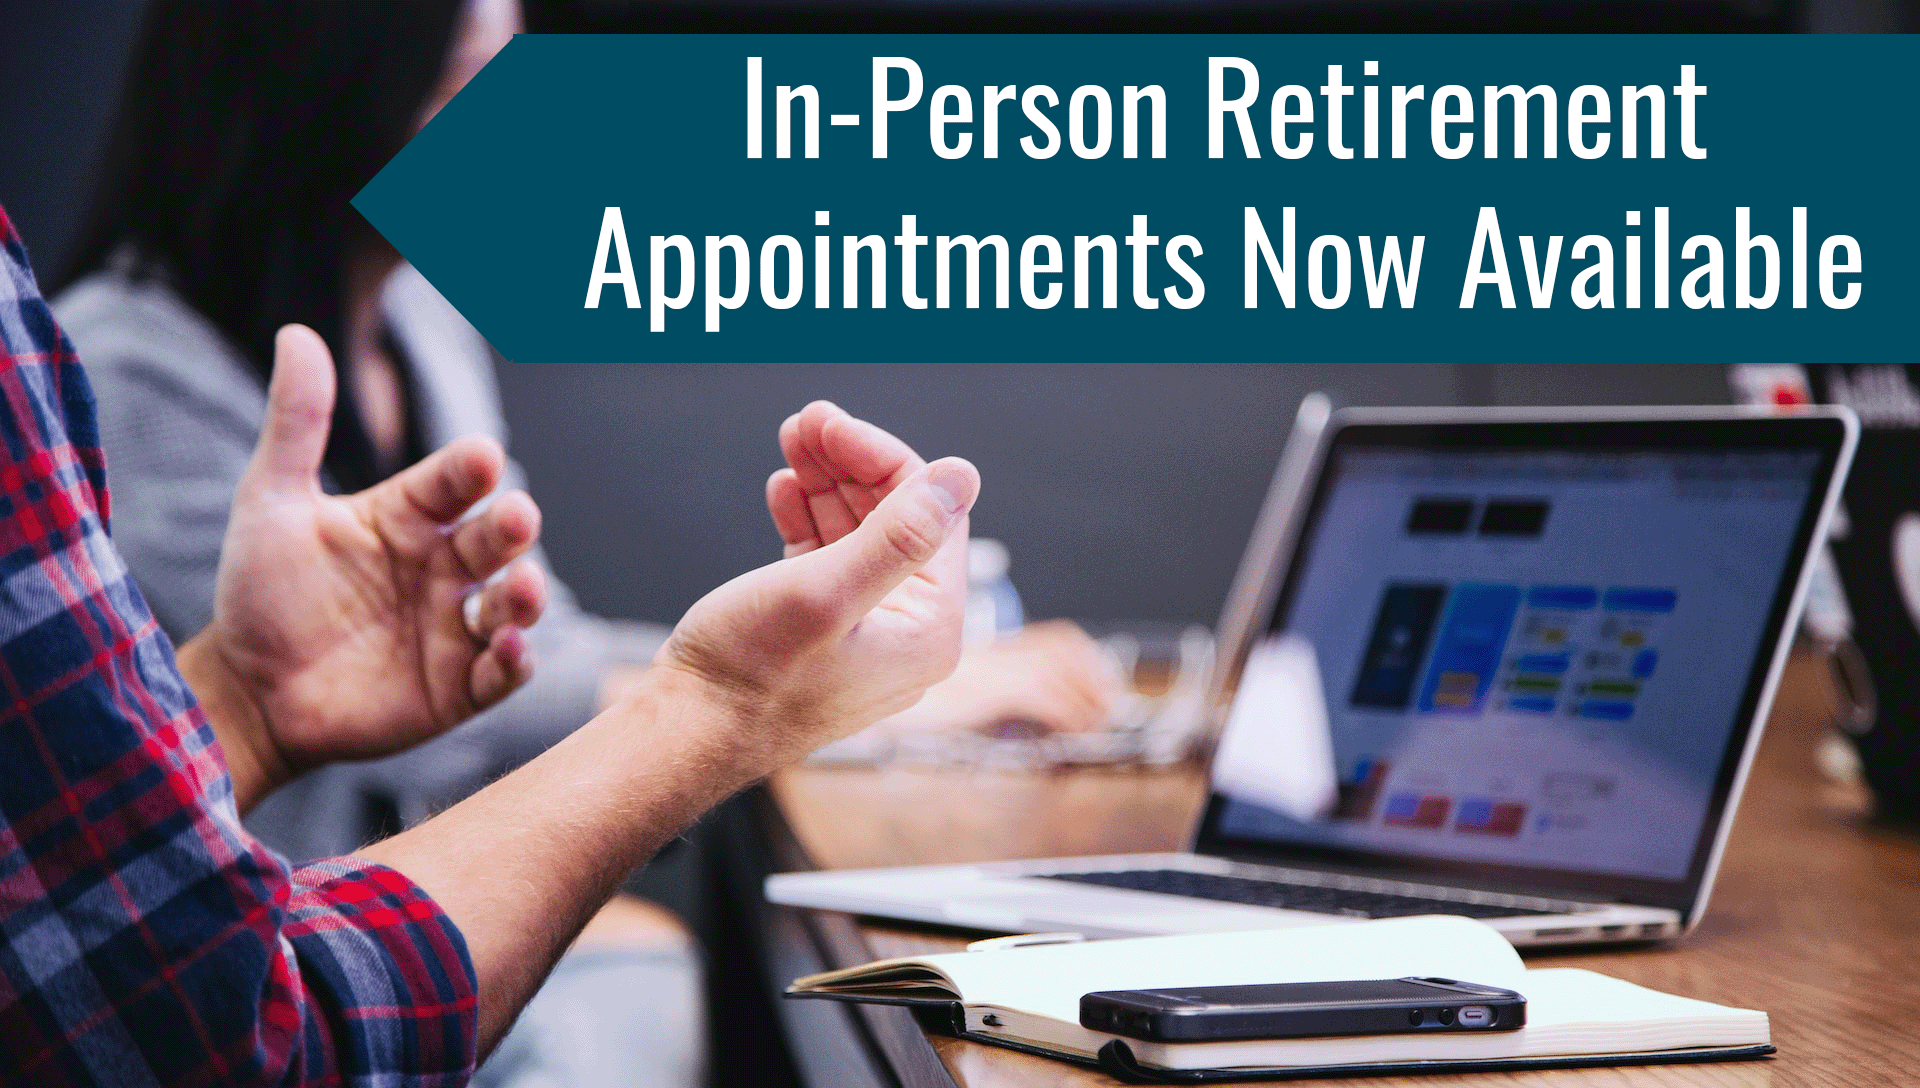 In person retirement appointments now available